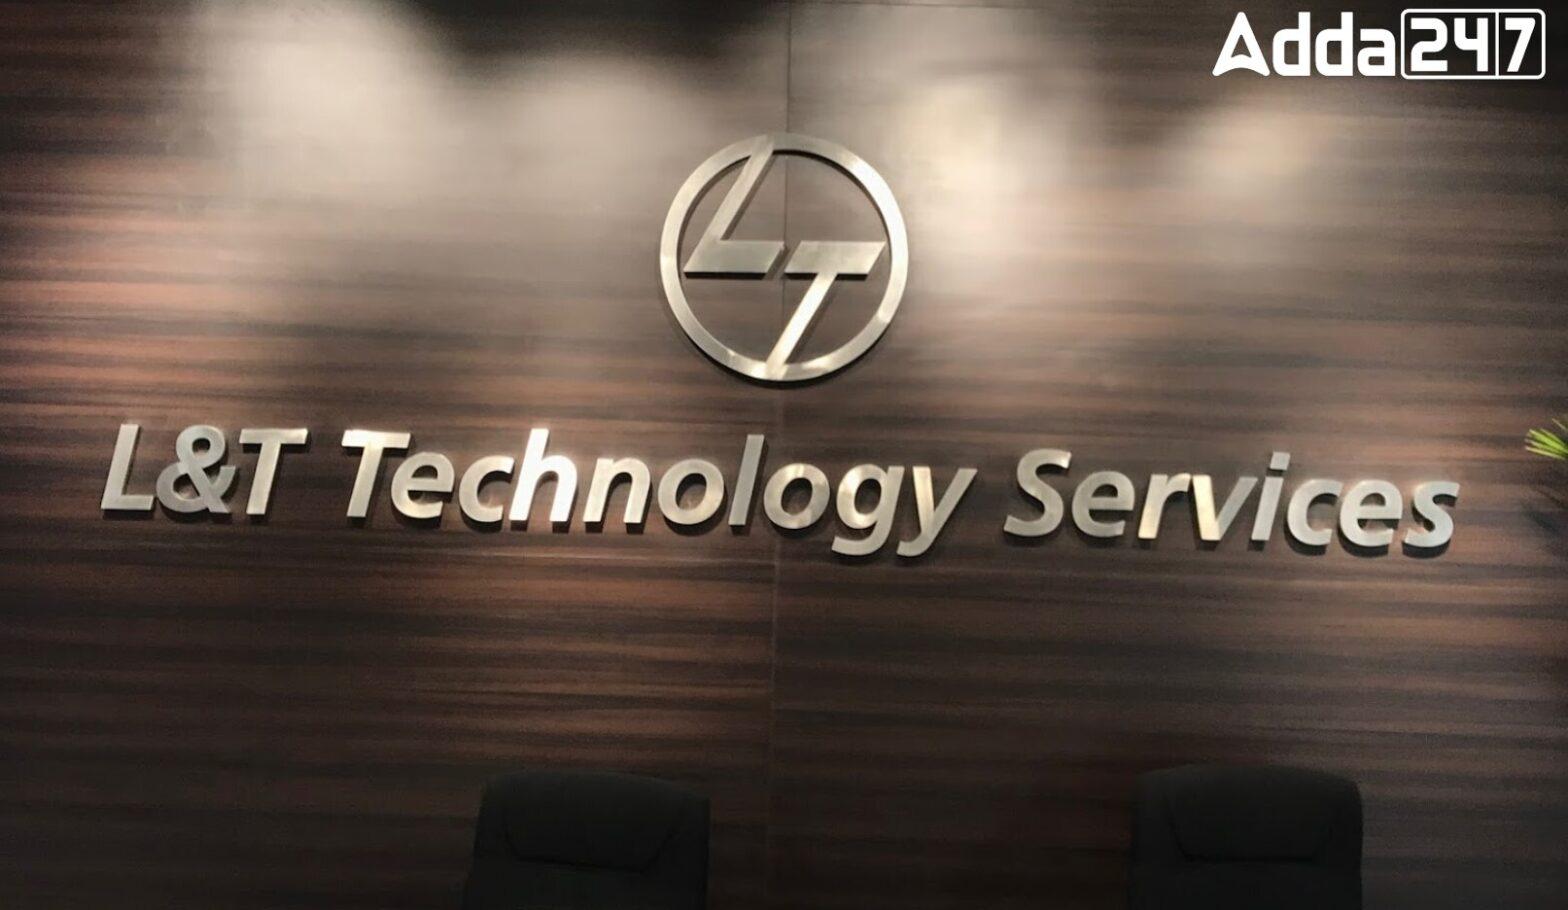 L&T Technology Services Launches Simulation Centre of Excellence for Airbus in Bengaluru